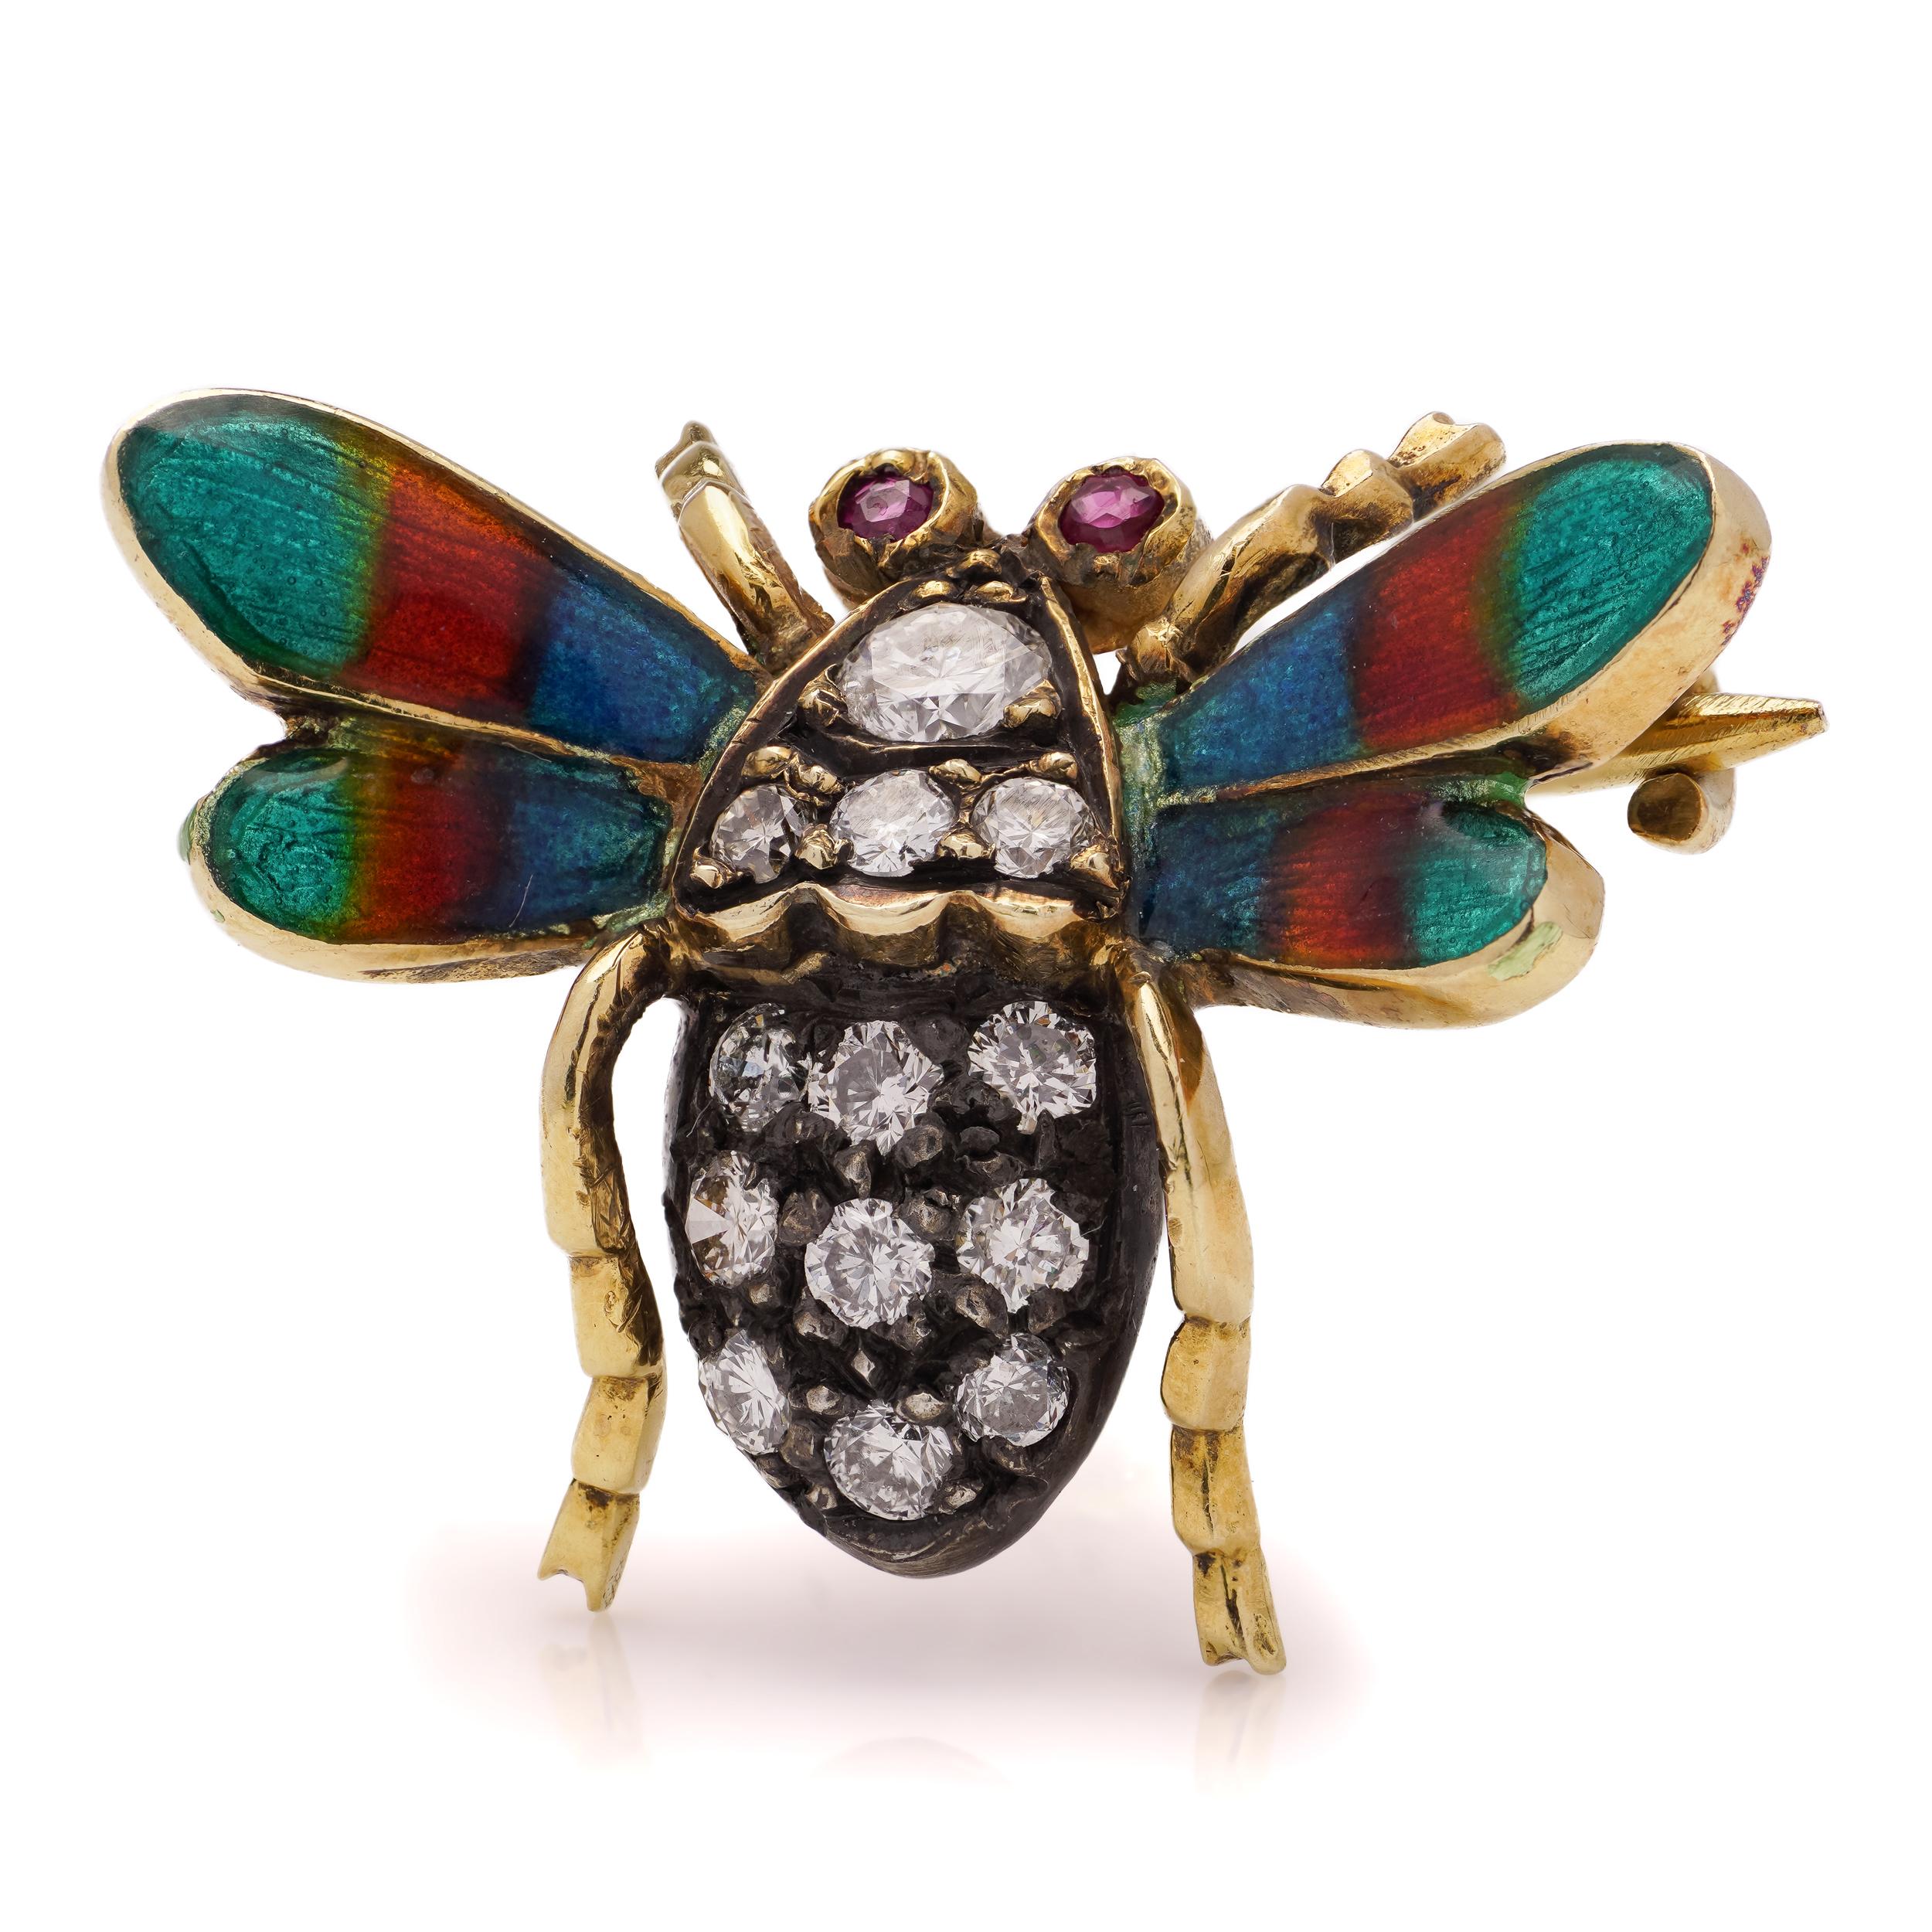  Edwardian 18kt. yellow gold and silver open-winged insect brooch For Sale 3